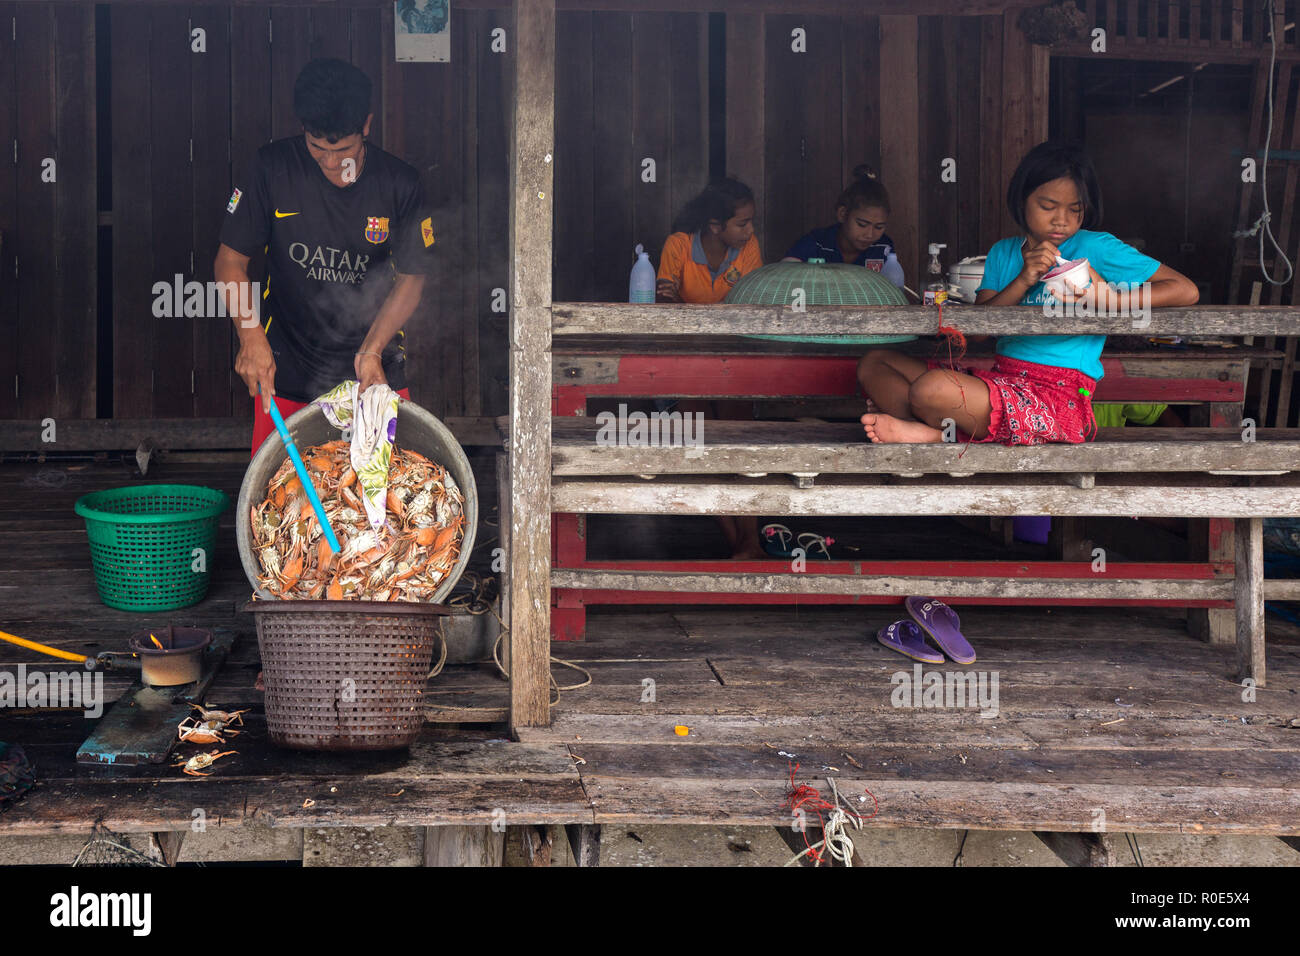 AO YAI, THAILAND, JANUARY 30, 2016 : A man is transferring cooked crabs in a plastic basket while his daughter is sitting and eating an ice-cream in t Stock Photo